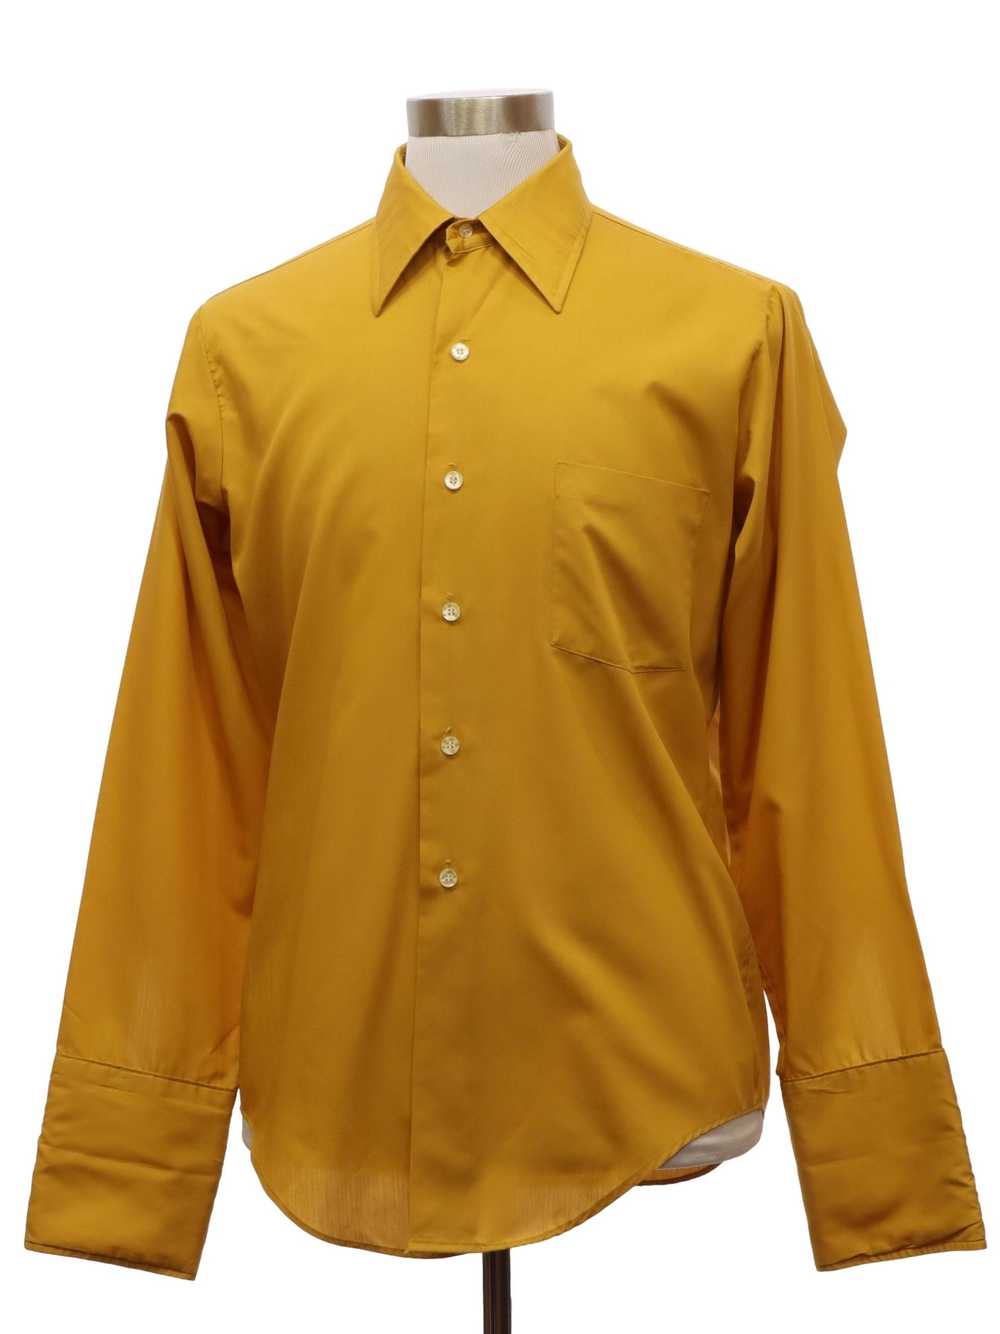 1960's Towncraft Plus Mens French Cuff Shirt - image 1